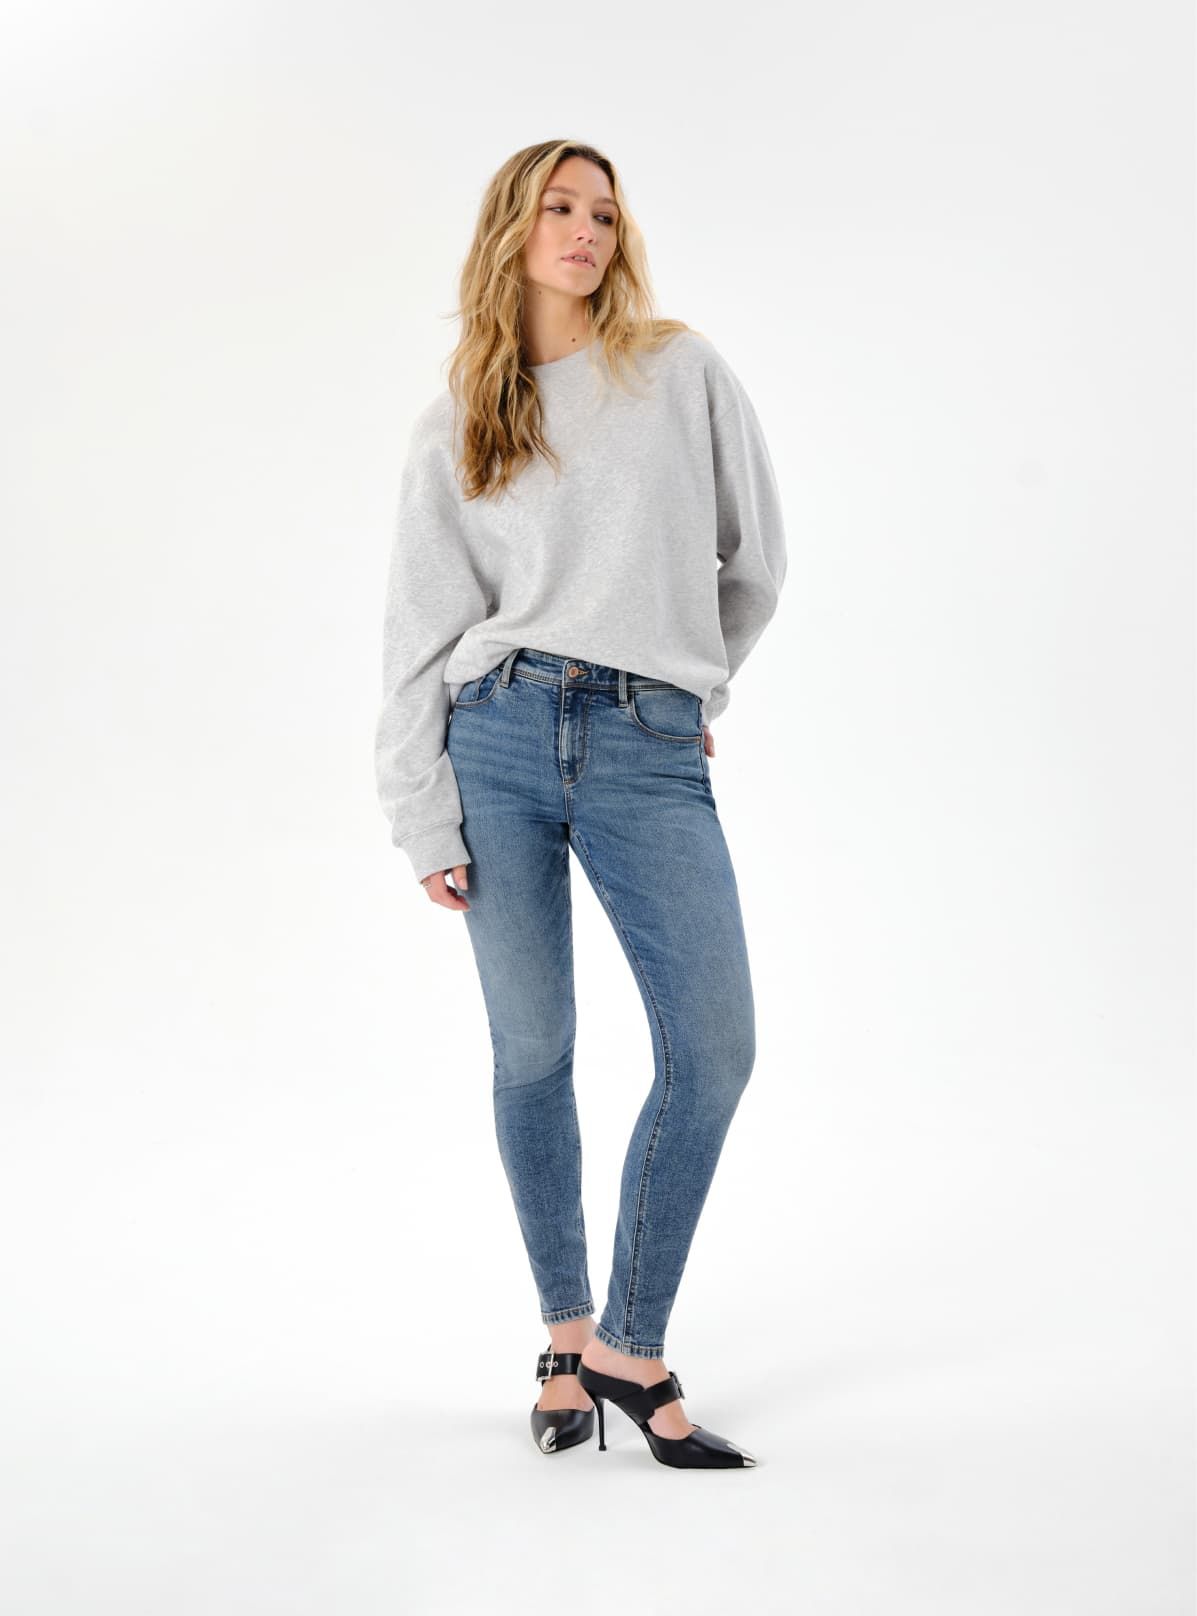 A model wears blue skinny jeans with a grey crewneck.